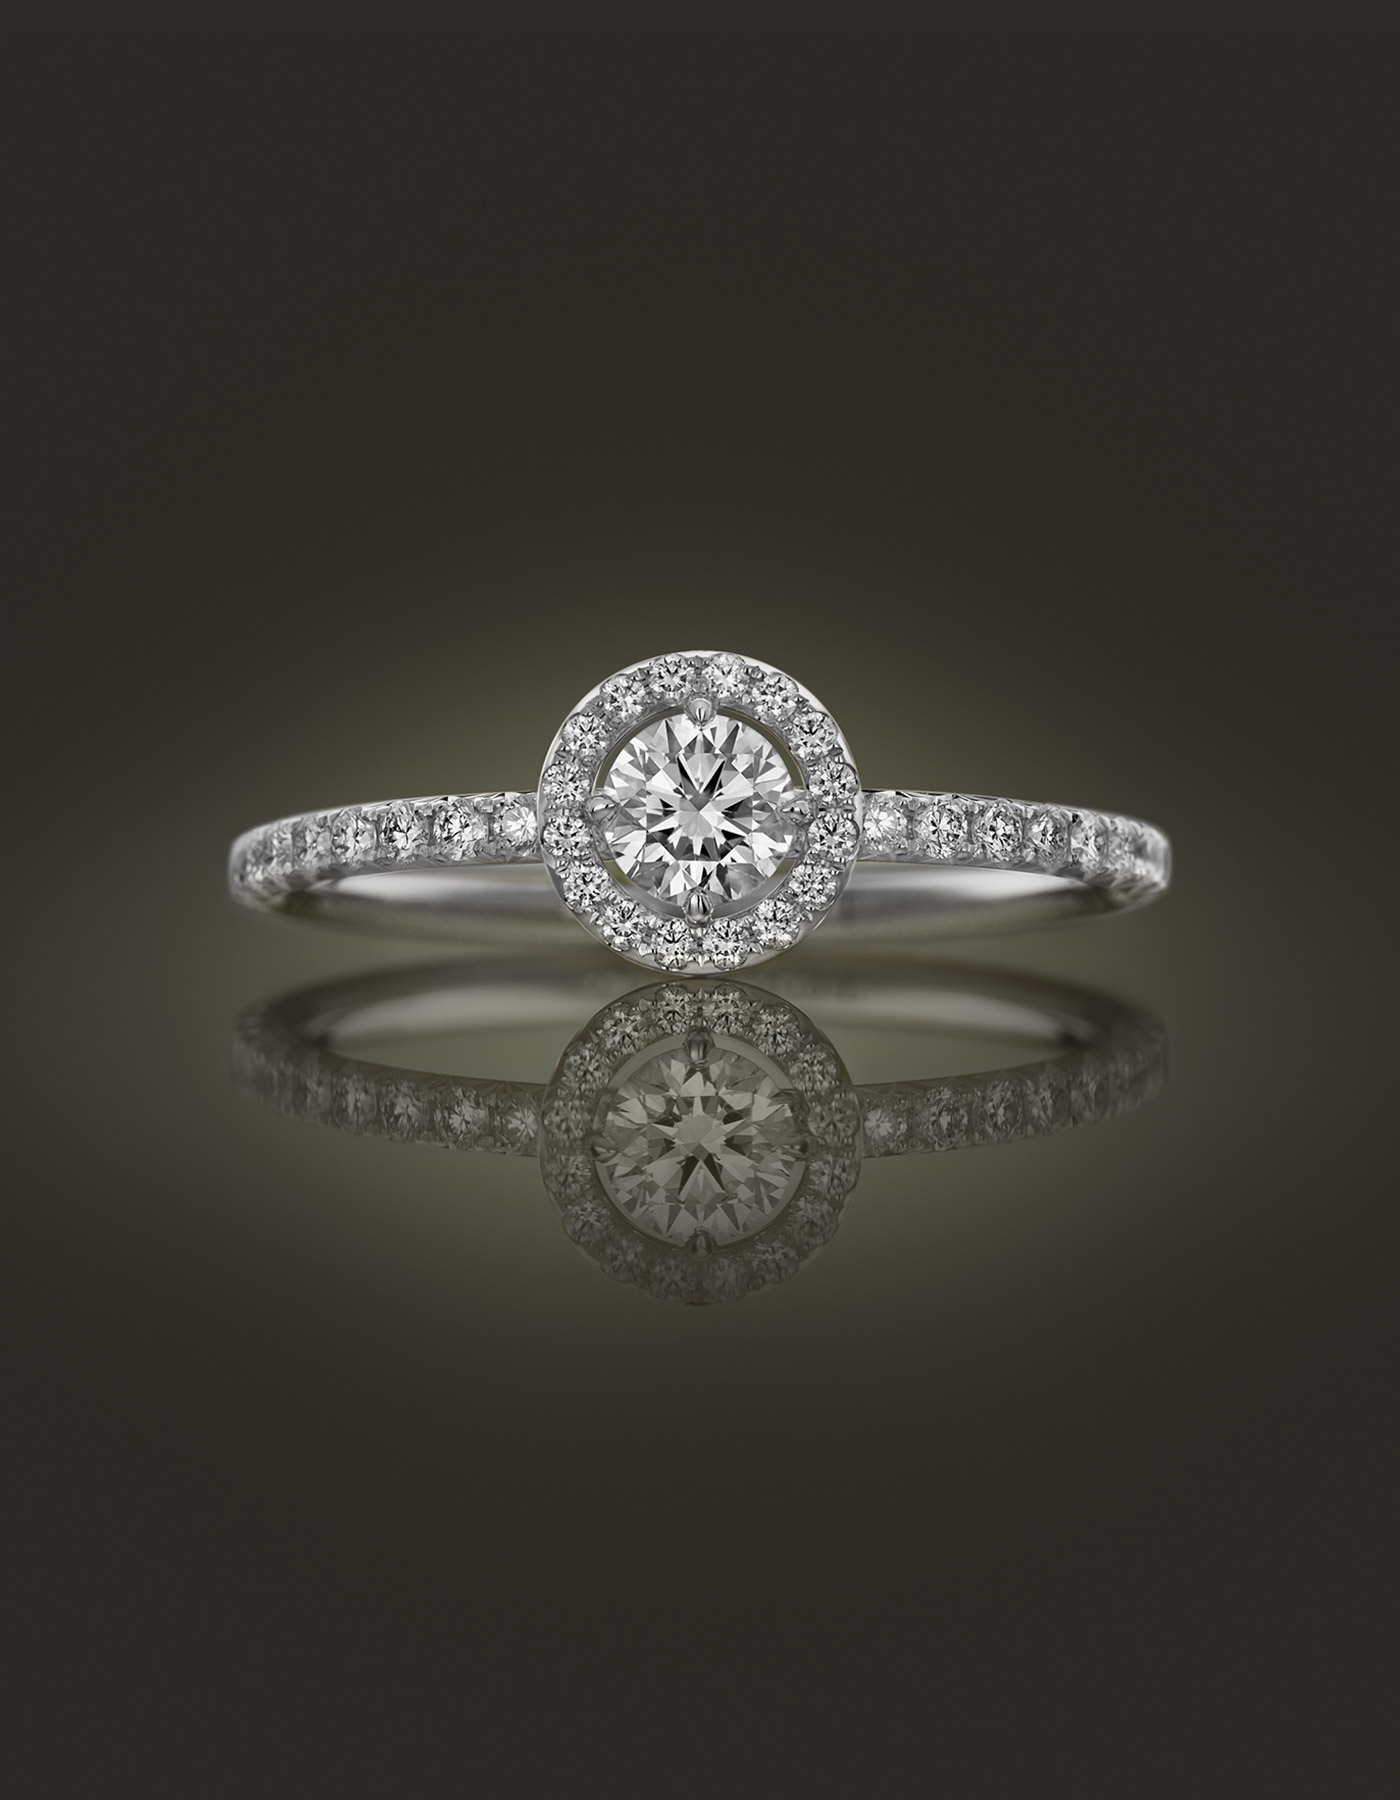 Guinnot Anonymous Halo diamond ring in 18k white gold